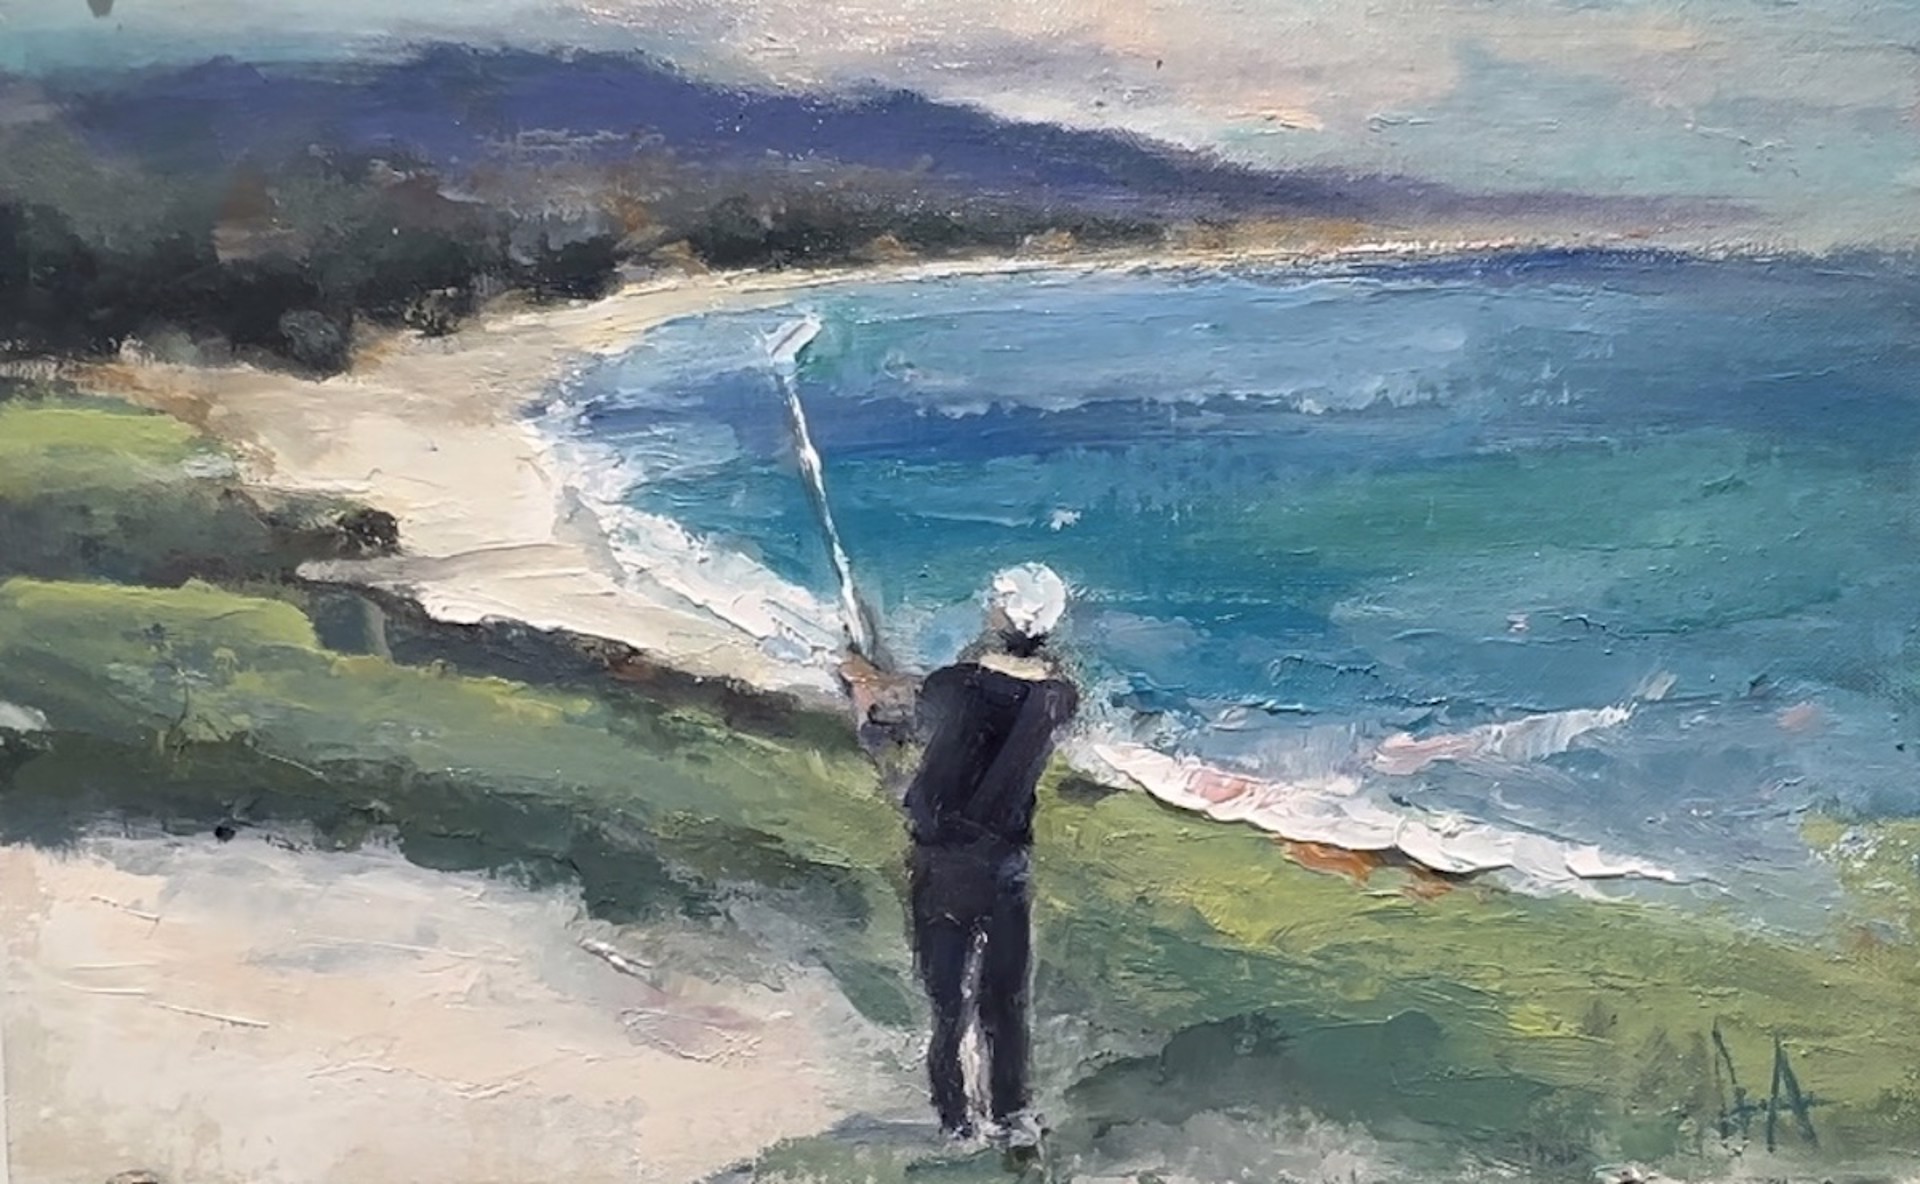 Golf at Pebble by Lilli-Anne Price